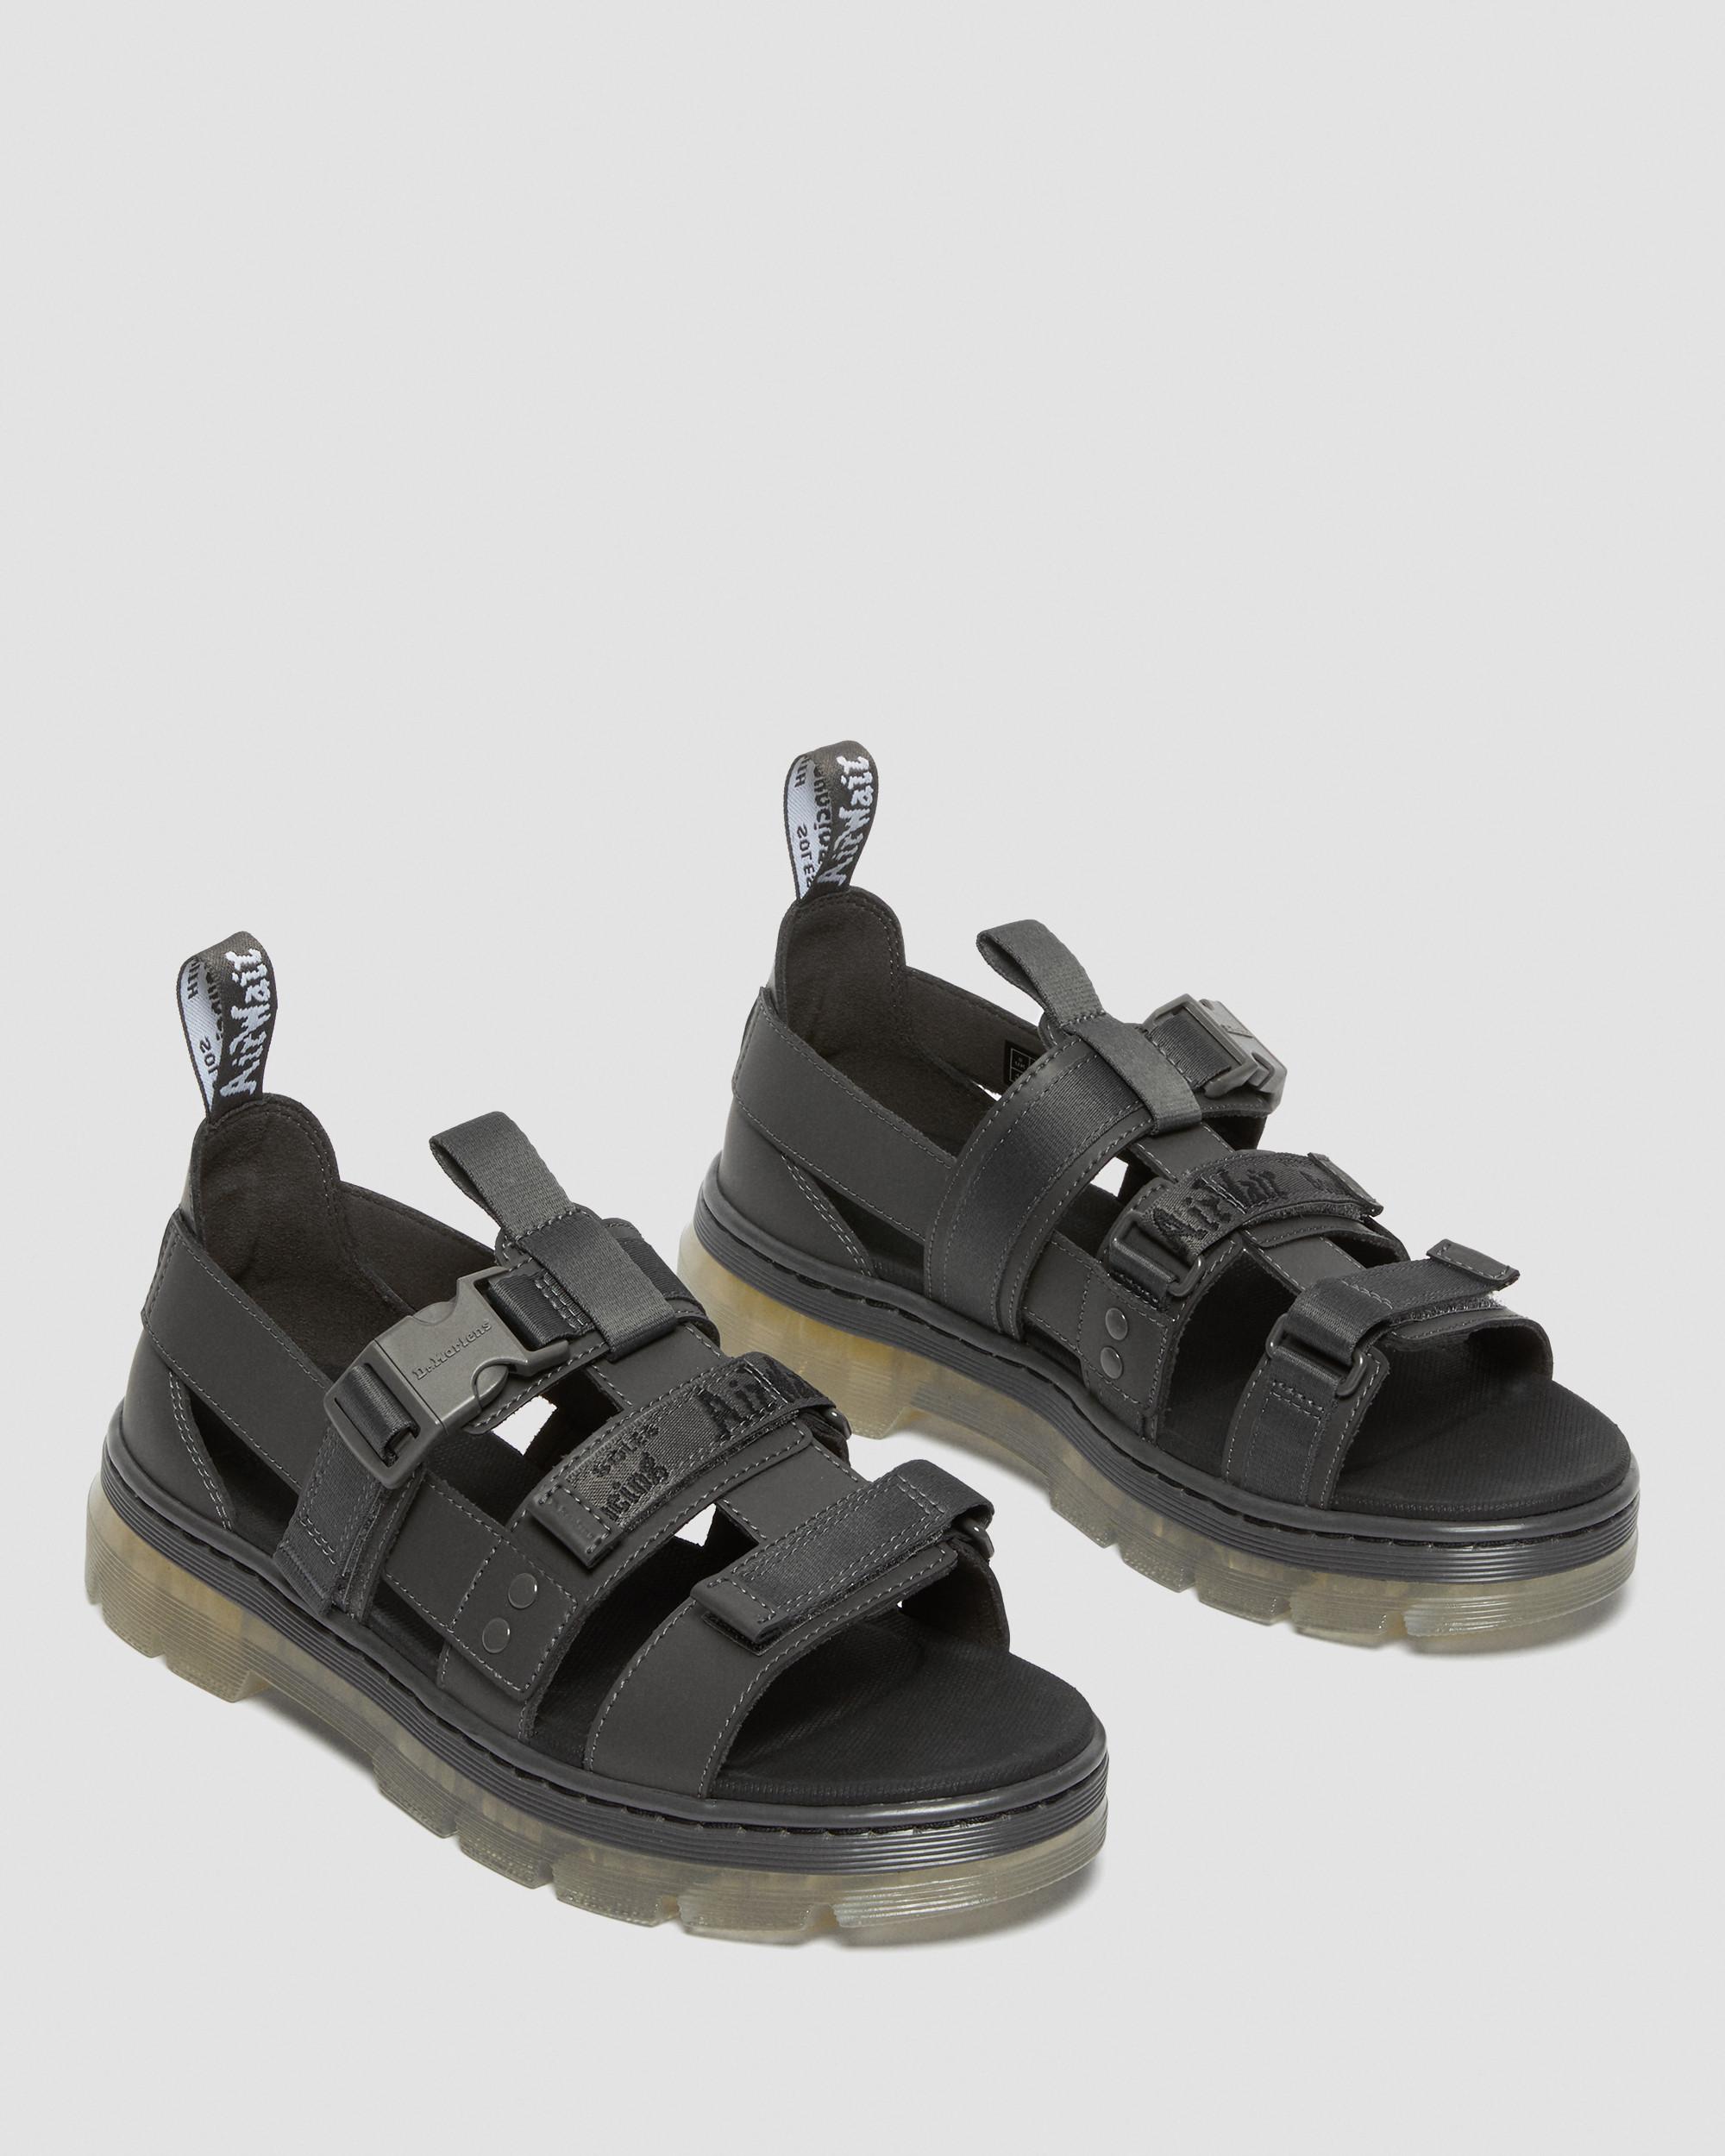 Pearson Iced Casual SandalsPearson Iced Casual Sandals Dr. Martens